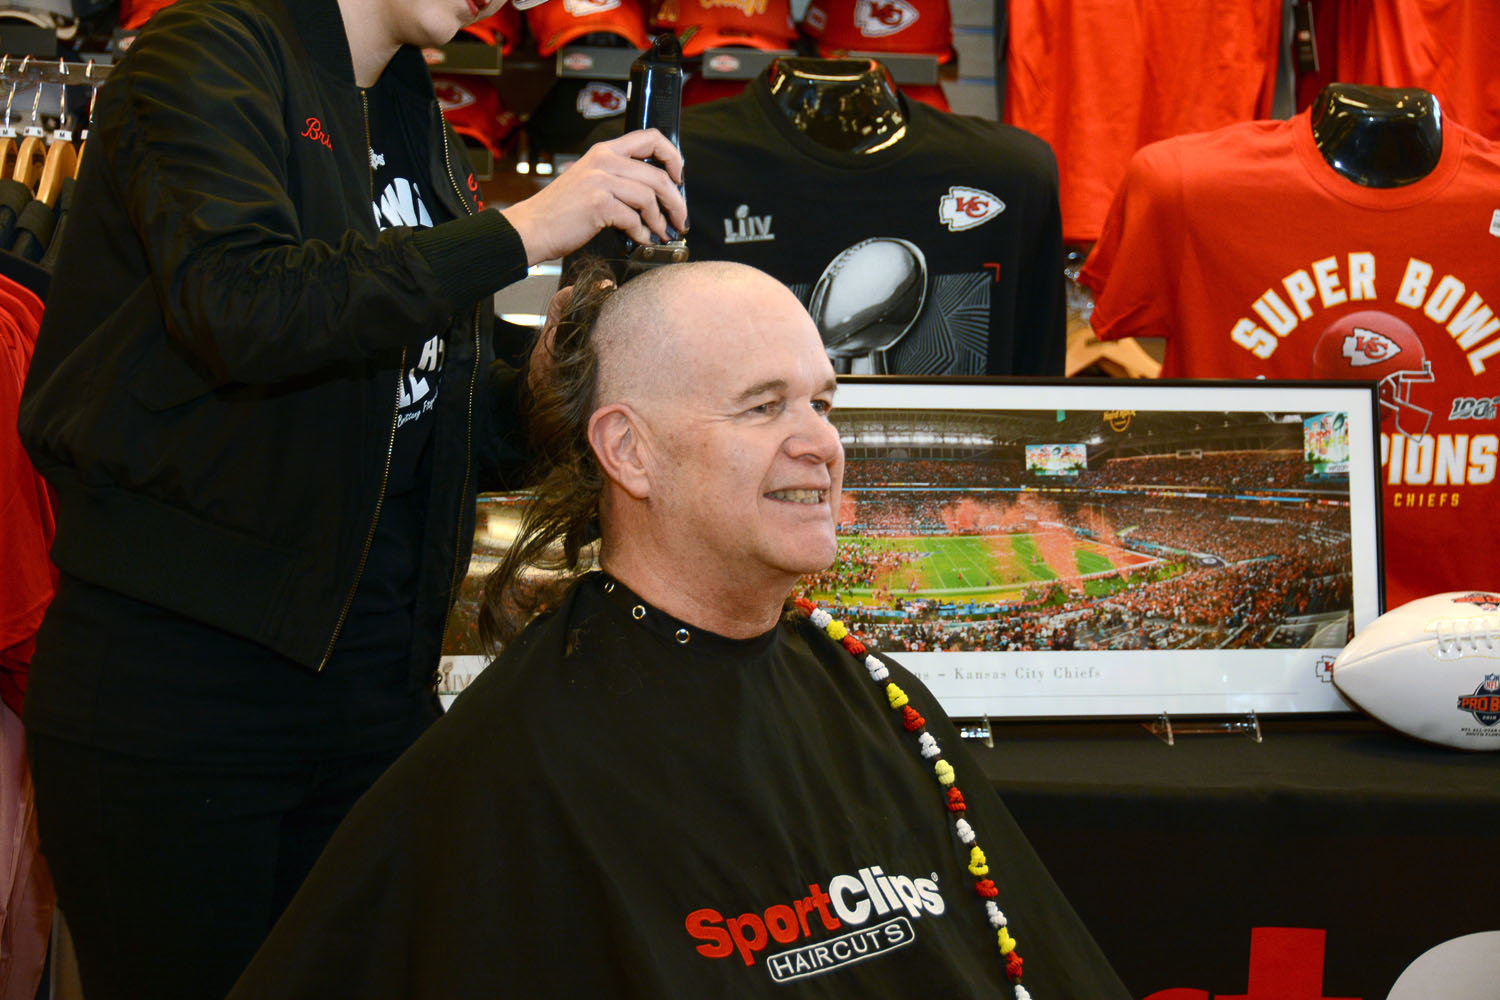 HISTORIC HAIRCUT
Diehard Kansas City Chiefs fan Loy Baker gets his head shaved days after the team’s Super Bowl victory. Baker hadn’t cut his hair in 25 years, keeping a vow he made after the Chiefs lost in the 1995 playoffs; the team had to win the title before he’d trim his locks – now a 32-inch ponytail. The crew from Sport Clips met Baker at the Rally Sports store to perform the historic cut.